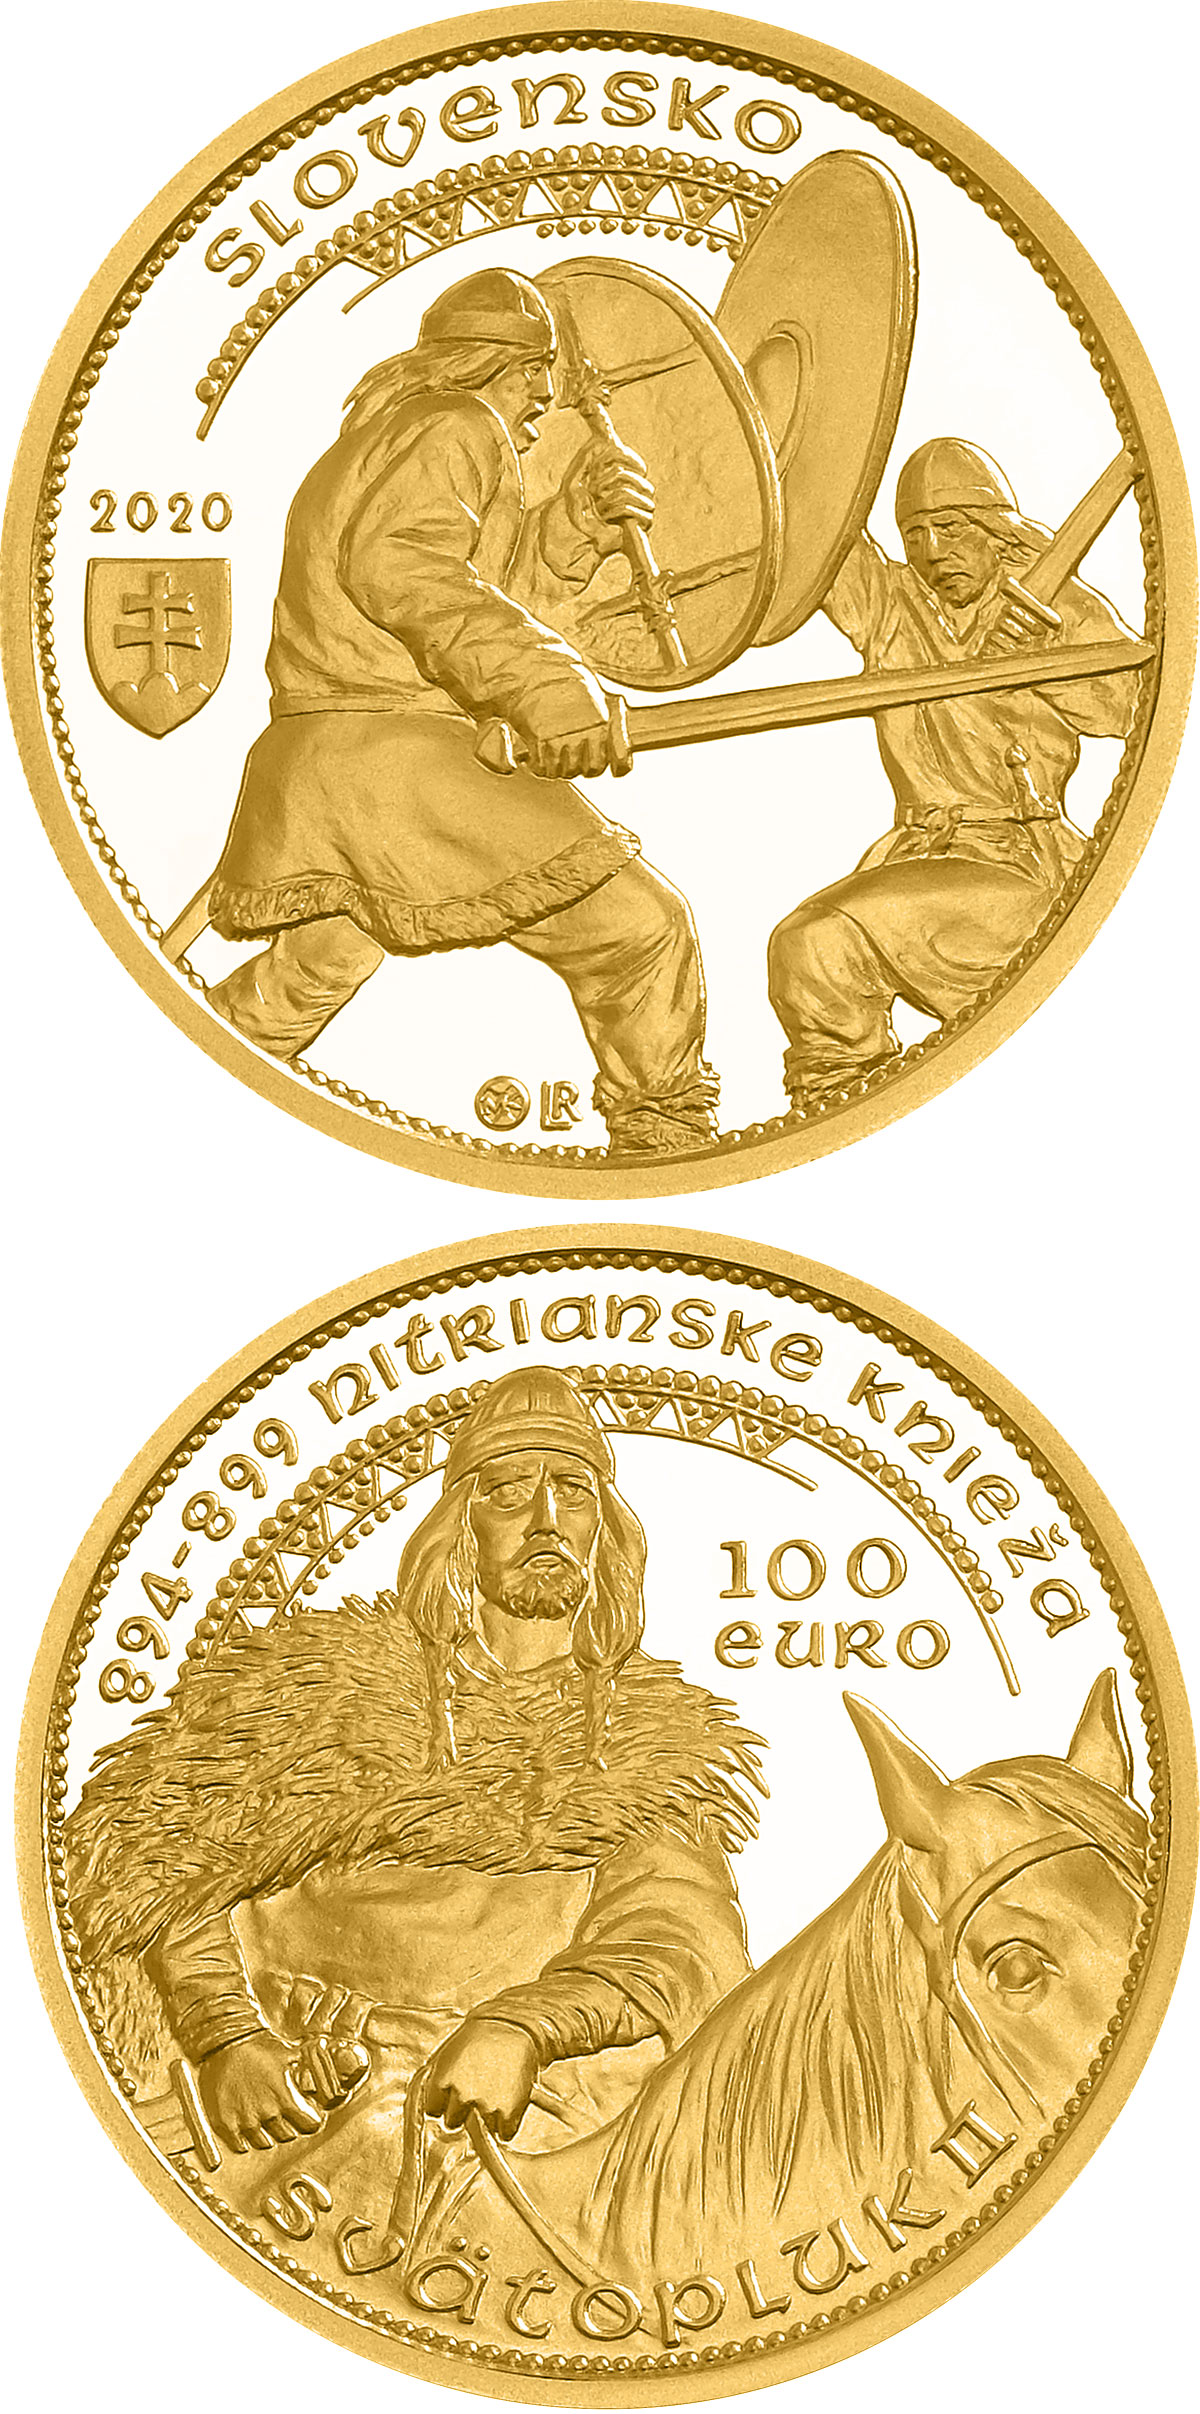 Image of 100 euro coin - Svatopluk II, Ruler of the Nitrian Principality | Slovakia 2020.  The Gold coin is of Proof quality.